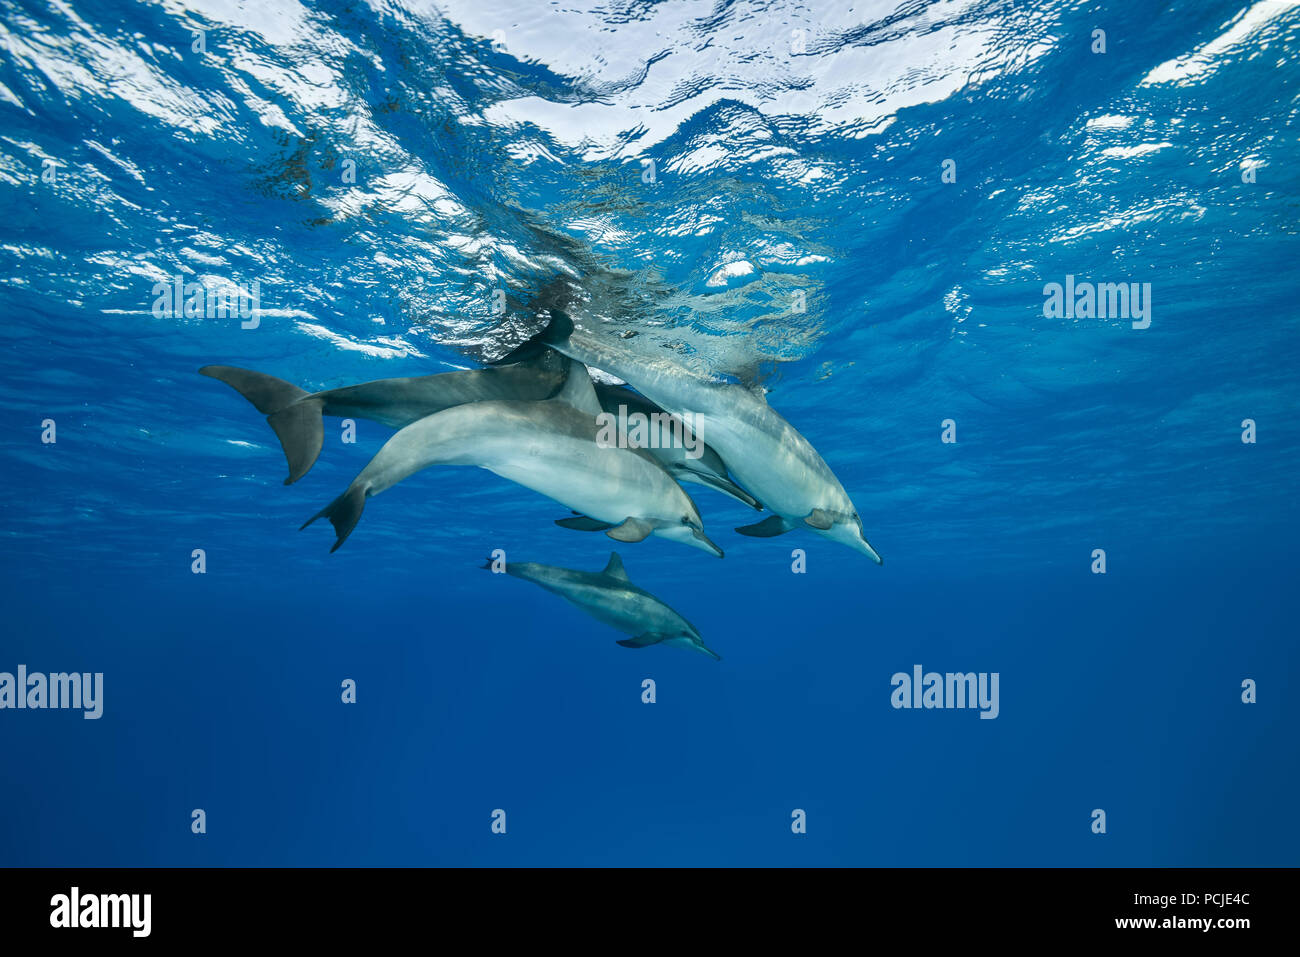 Family of Spinner Dolphins (Stenella longirostris) swim under surface of water Stock Photo